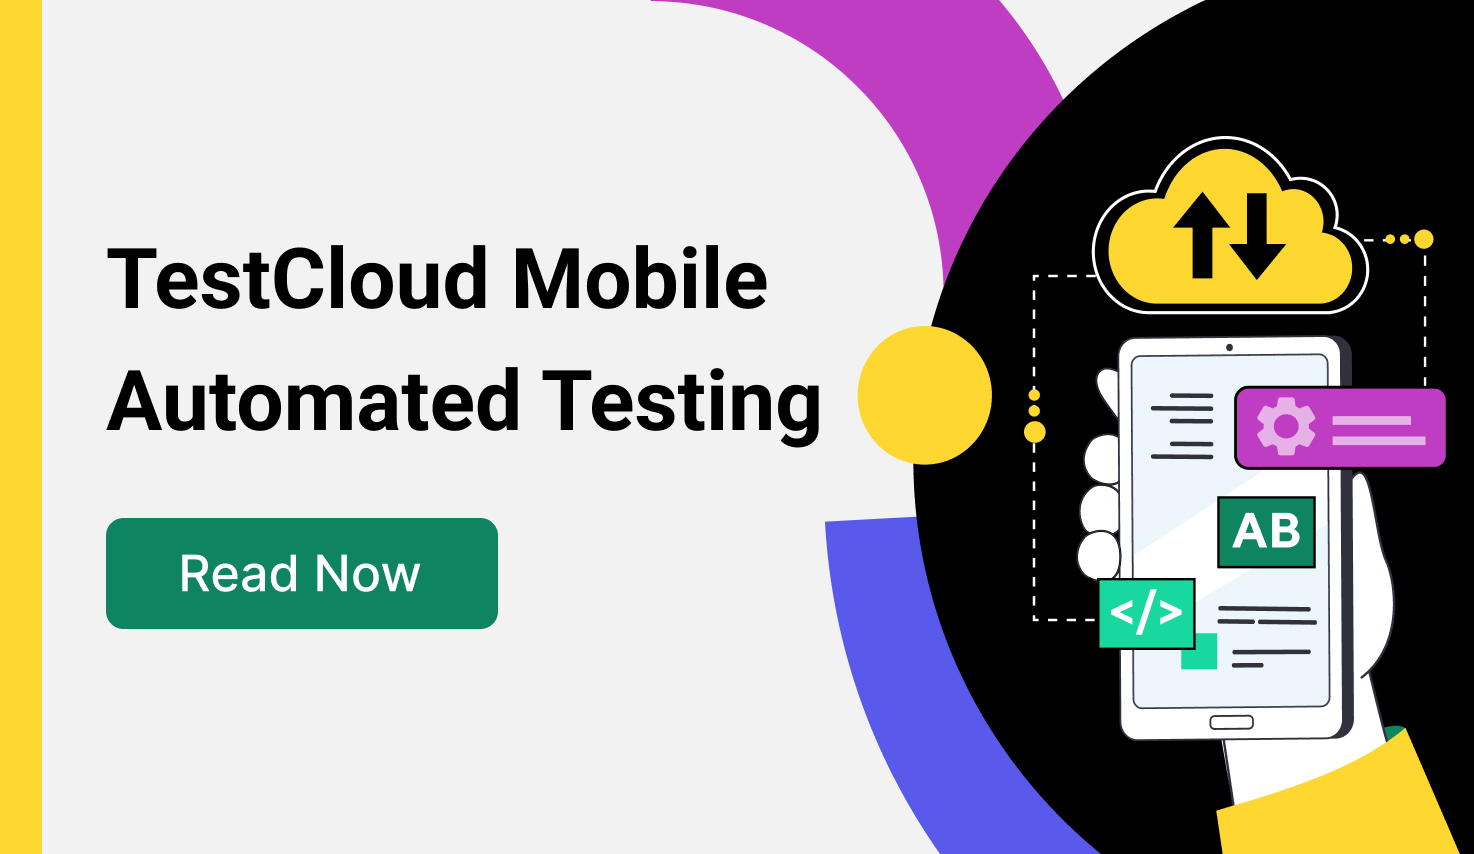 Announcing TestCloud Mobile Automated Testing